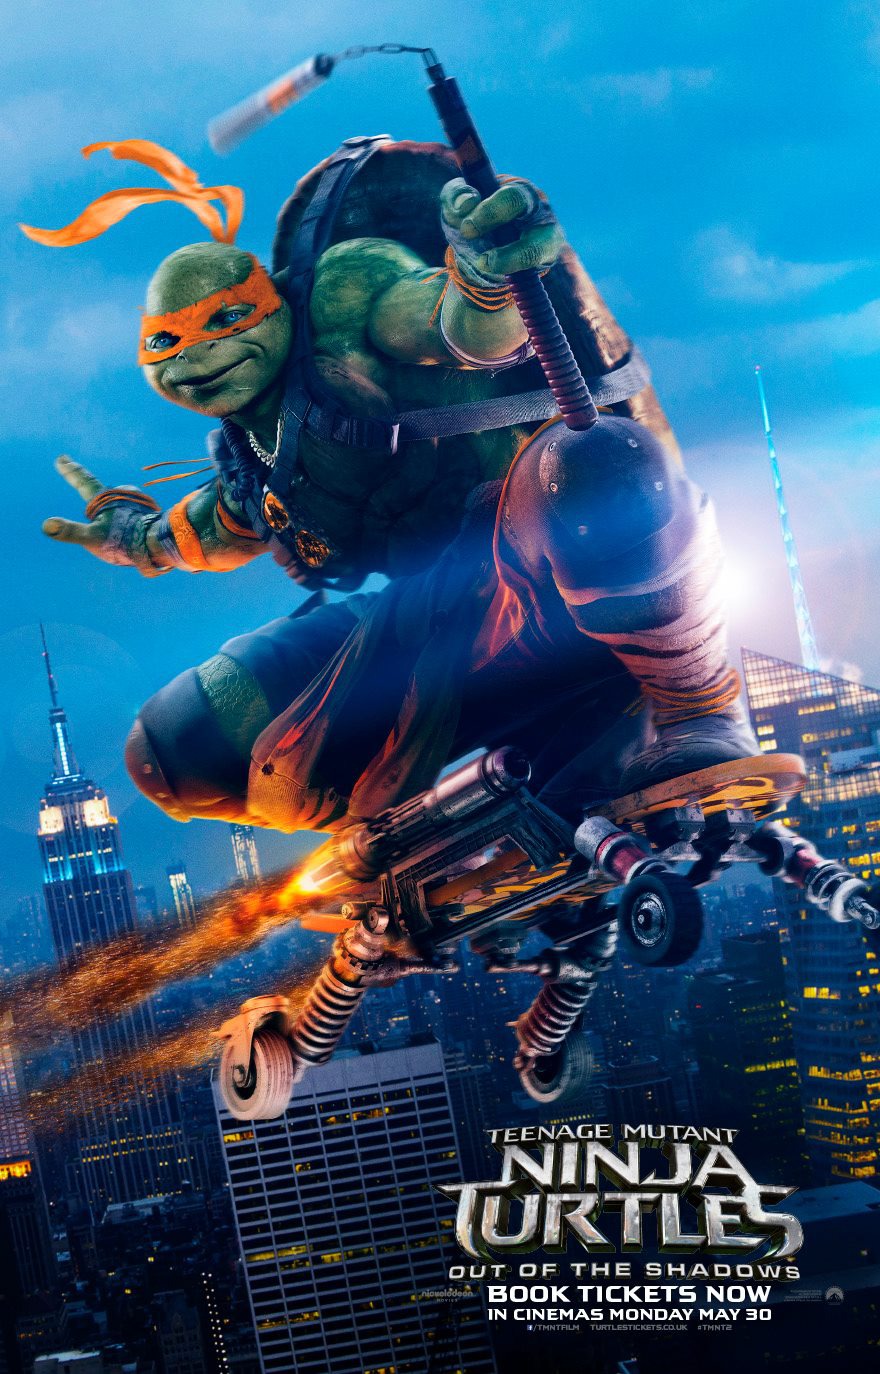 https://static.wikia.nocookie.net/tmnt/images/b/b0/OOTS_UK_Poster_02.jpg/revision/latest?cb=20160505180412